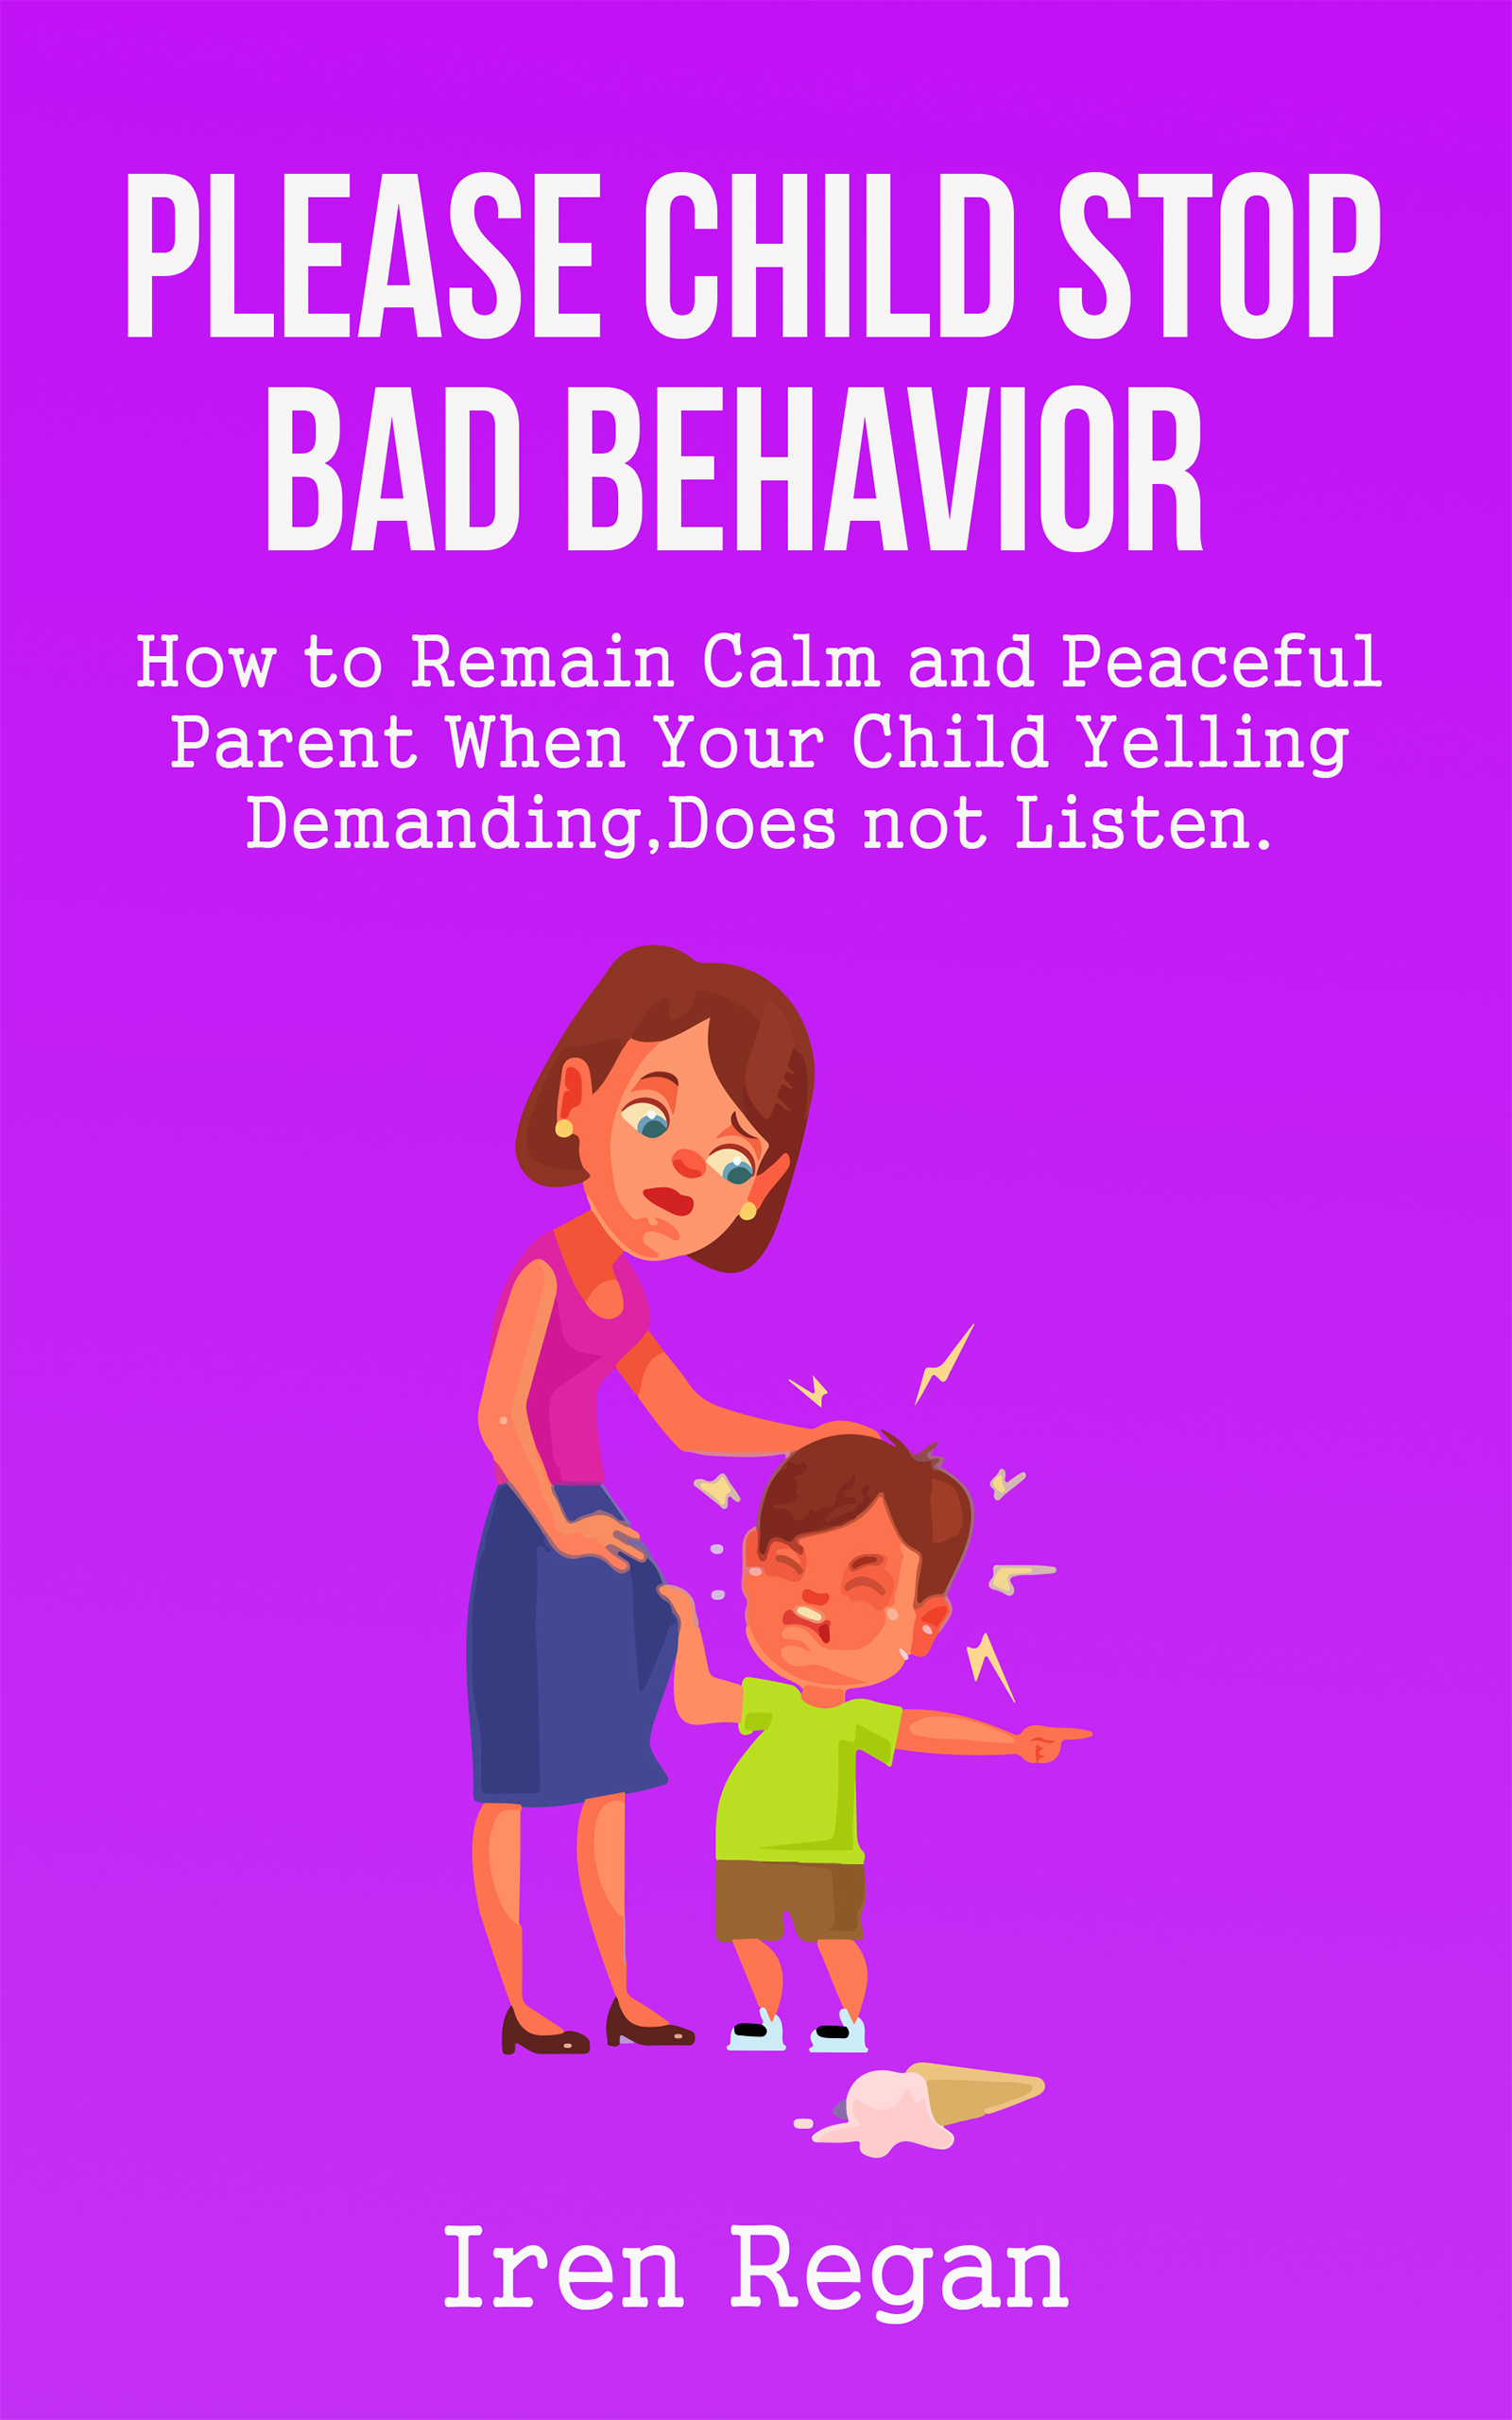 FREE: Please Child Stop Bad Behavior How to Remain Calm and Peaceful Parent: When Your Child Yelling, Demanding, Does Not listen by Iren Regan